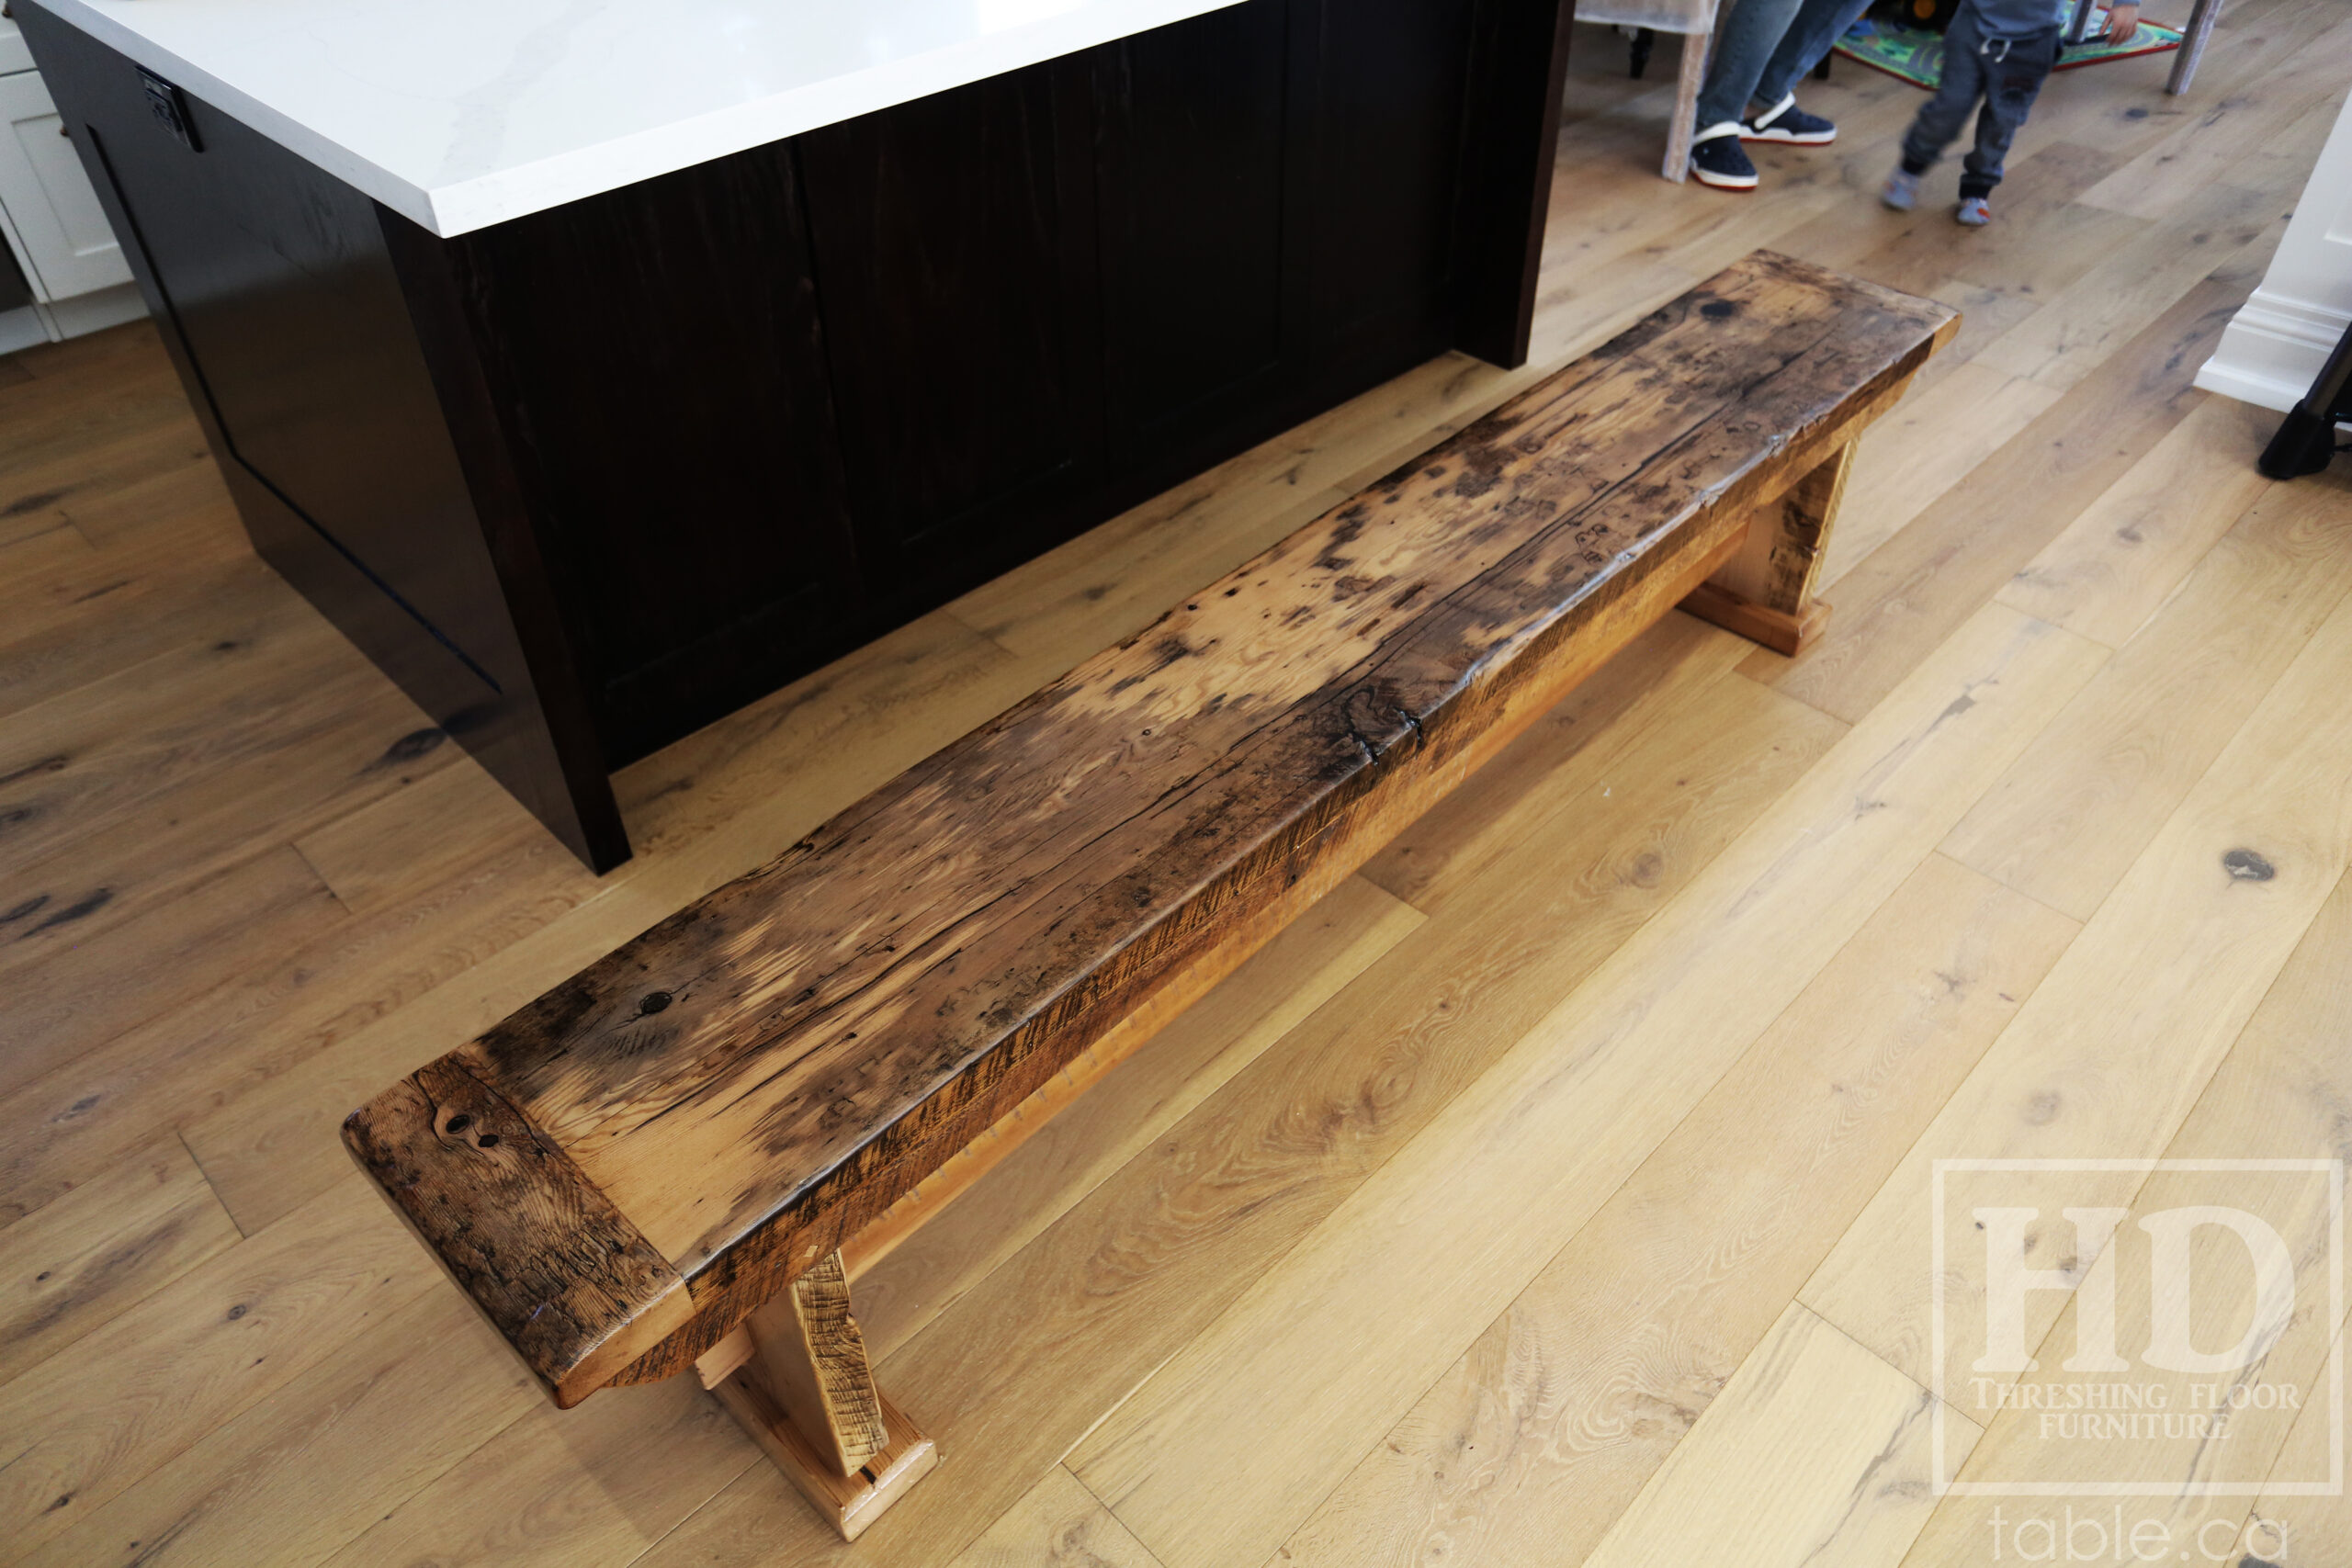 Project Summary: 7’ Reclaimed Ontario Barnwood Table we made for an Oakville, Ontario Home – 42” wide – Sawbuck Base - Old Growth Hemlock Threshing Floor Construction - Original edges & distressing maintained – Bread Edge Boards – Greytone Option - Premium epoxy + satin polyurethane finish – One 18” Leaf – 7’ [matching] Bench - www.table.ca